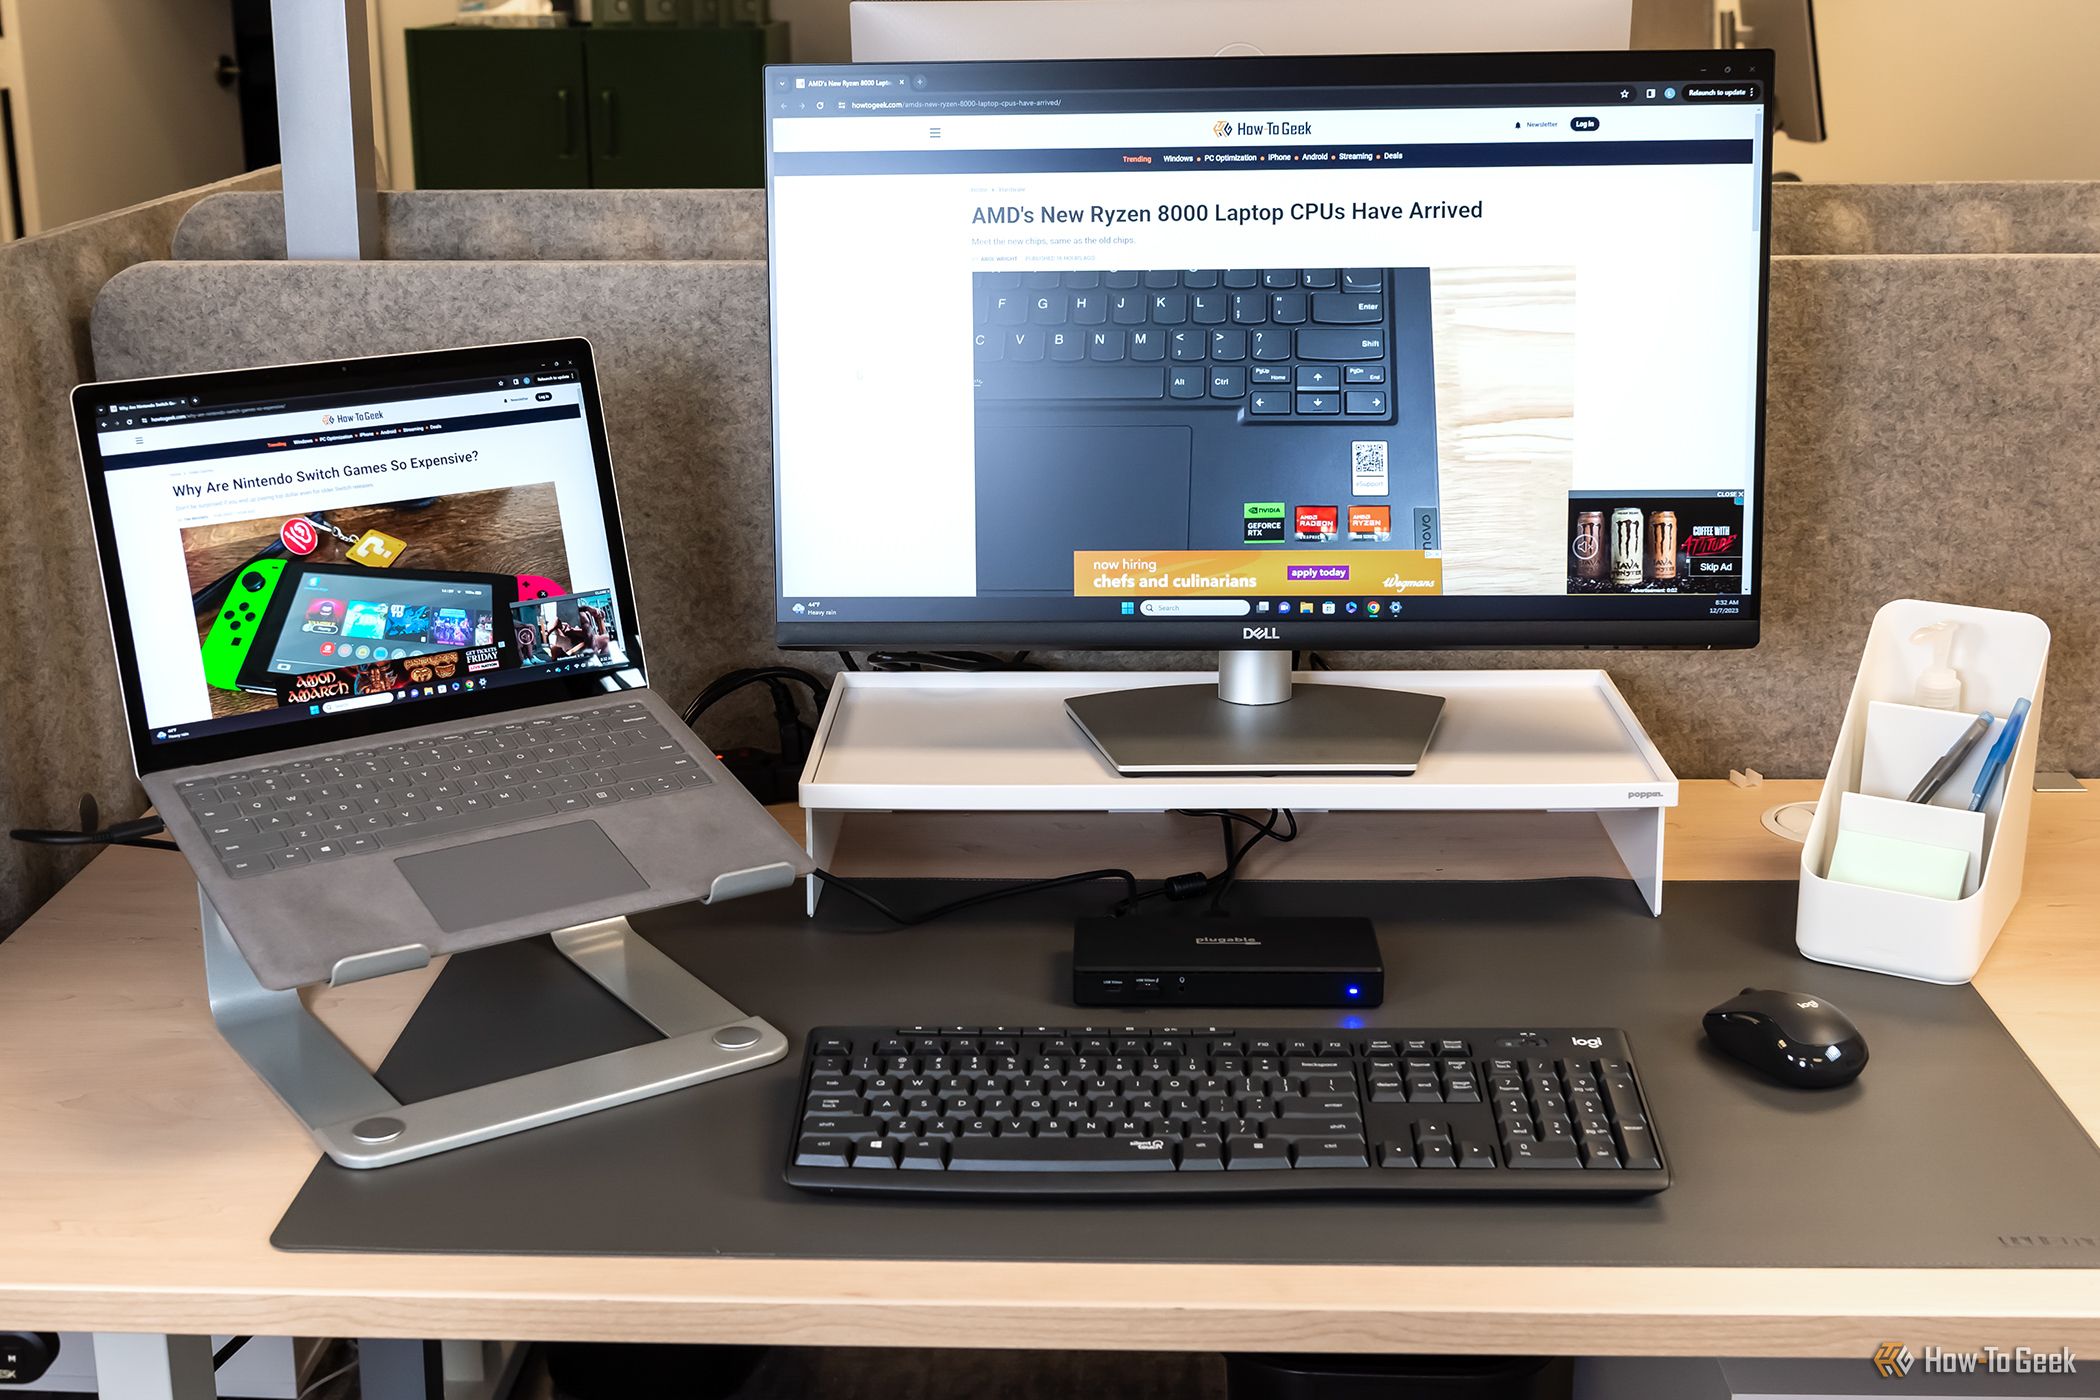 The Plugable USB C Dual HDMI Docking Station set up at a desk